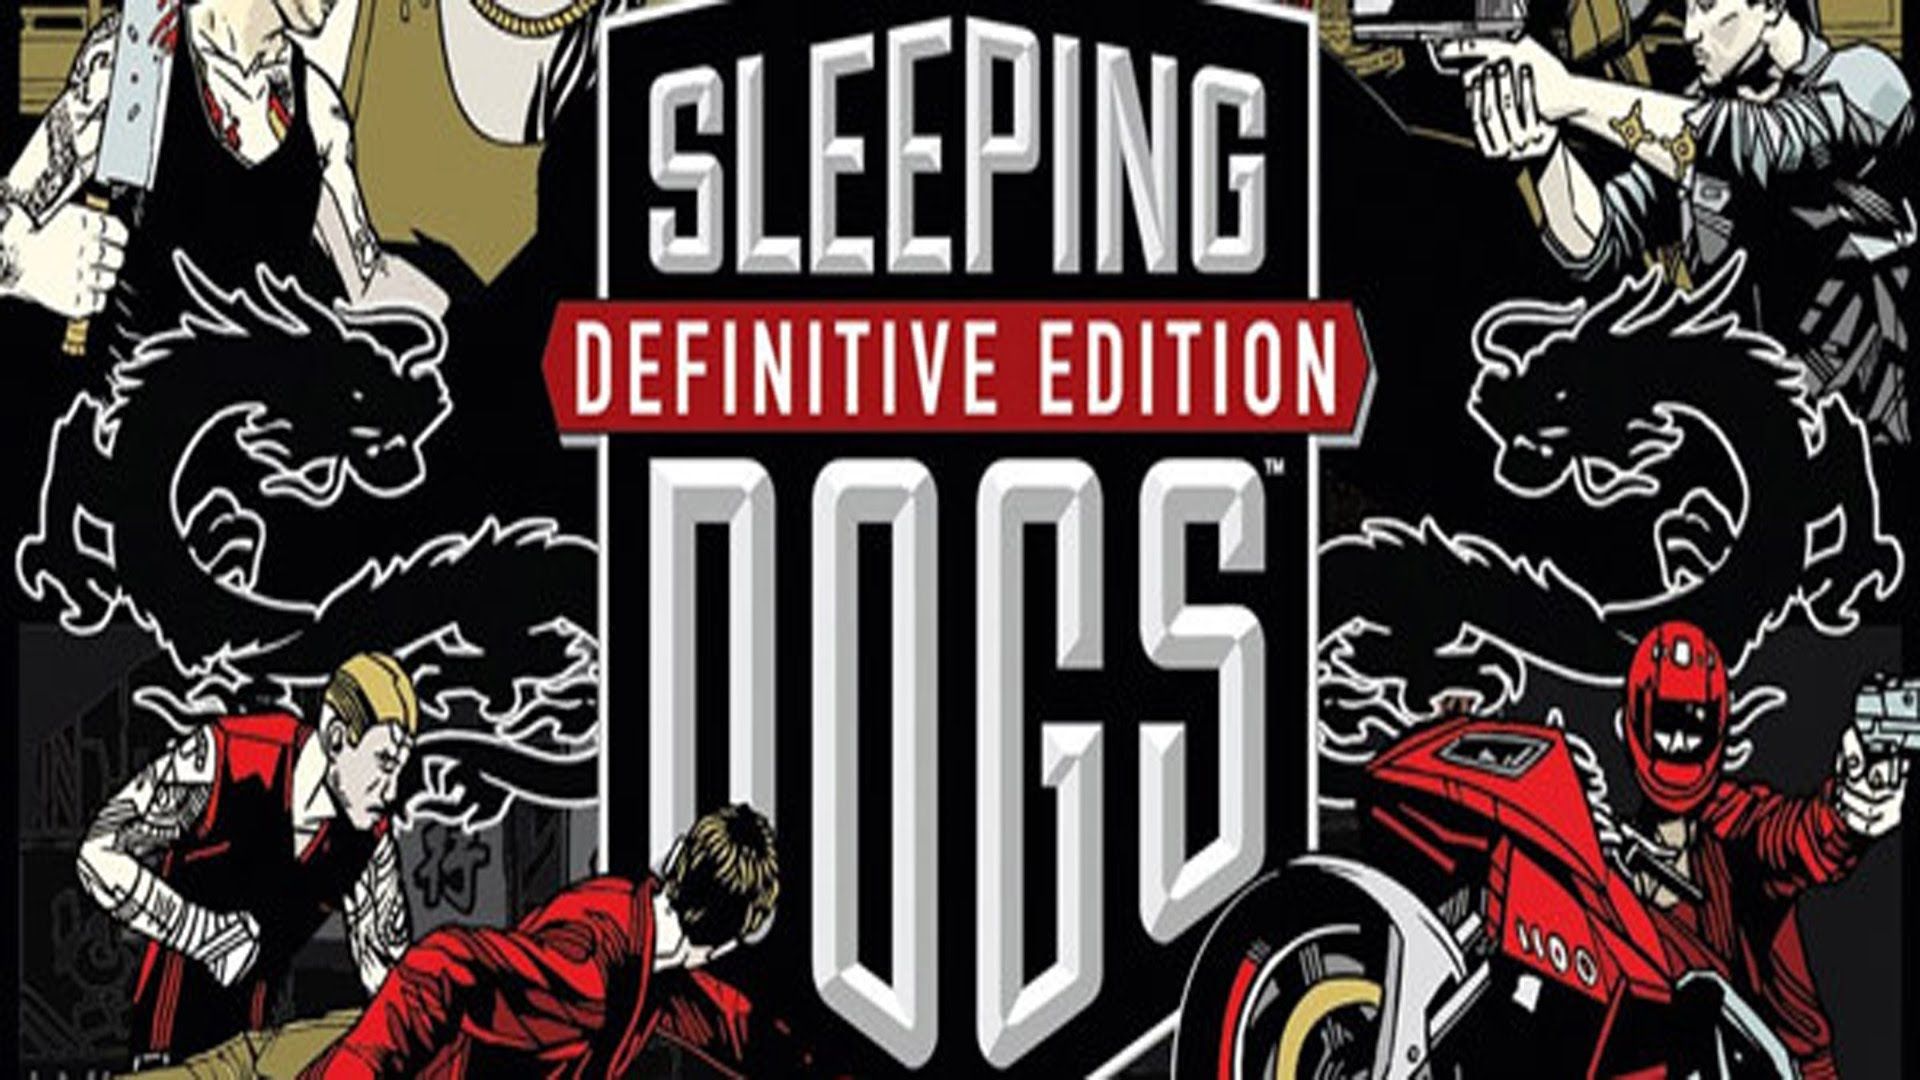 iphone xs max sleeping dogs background